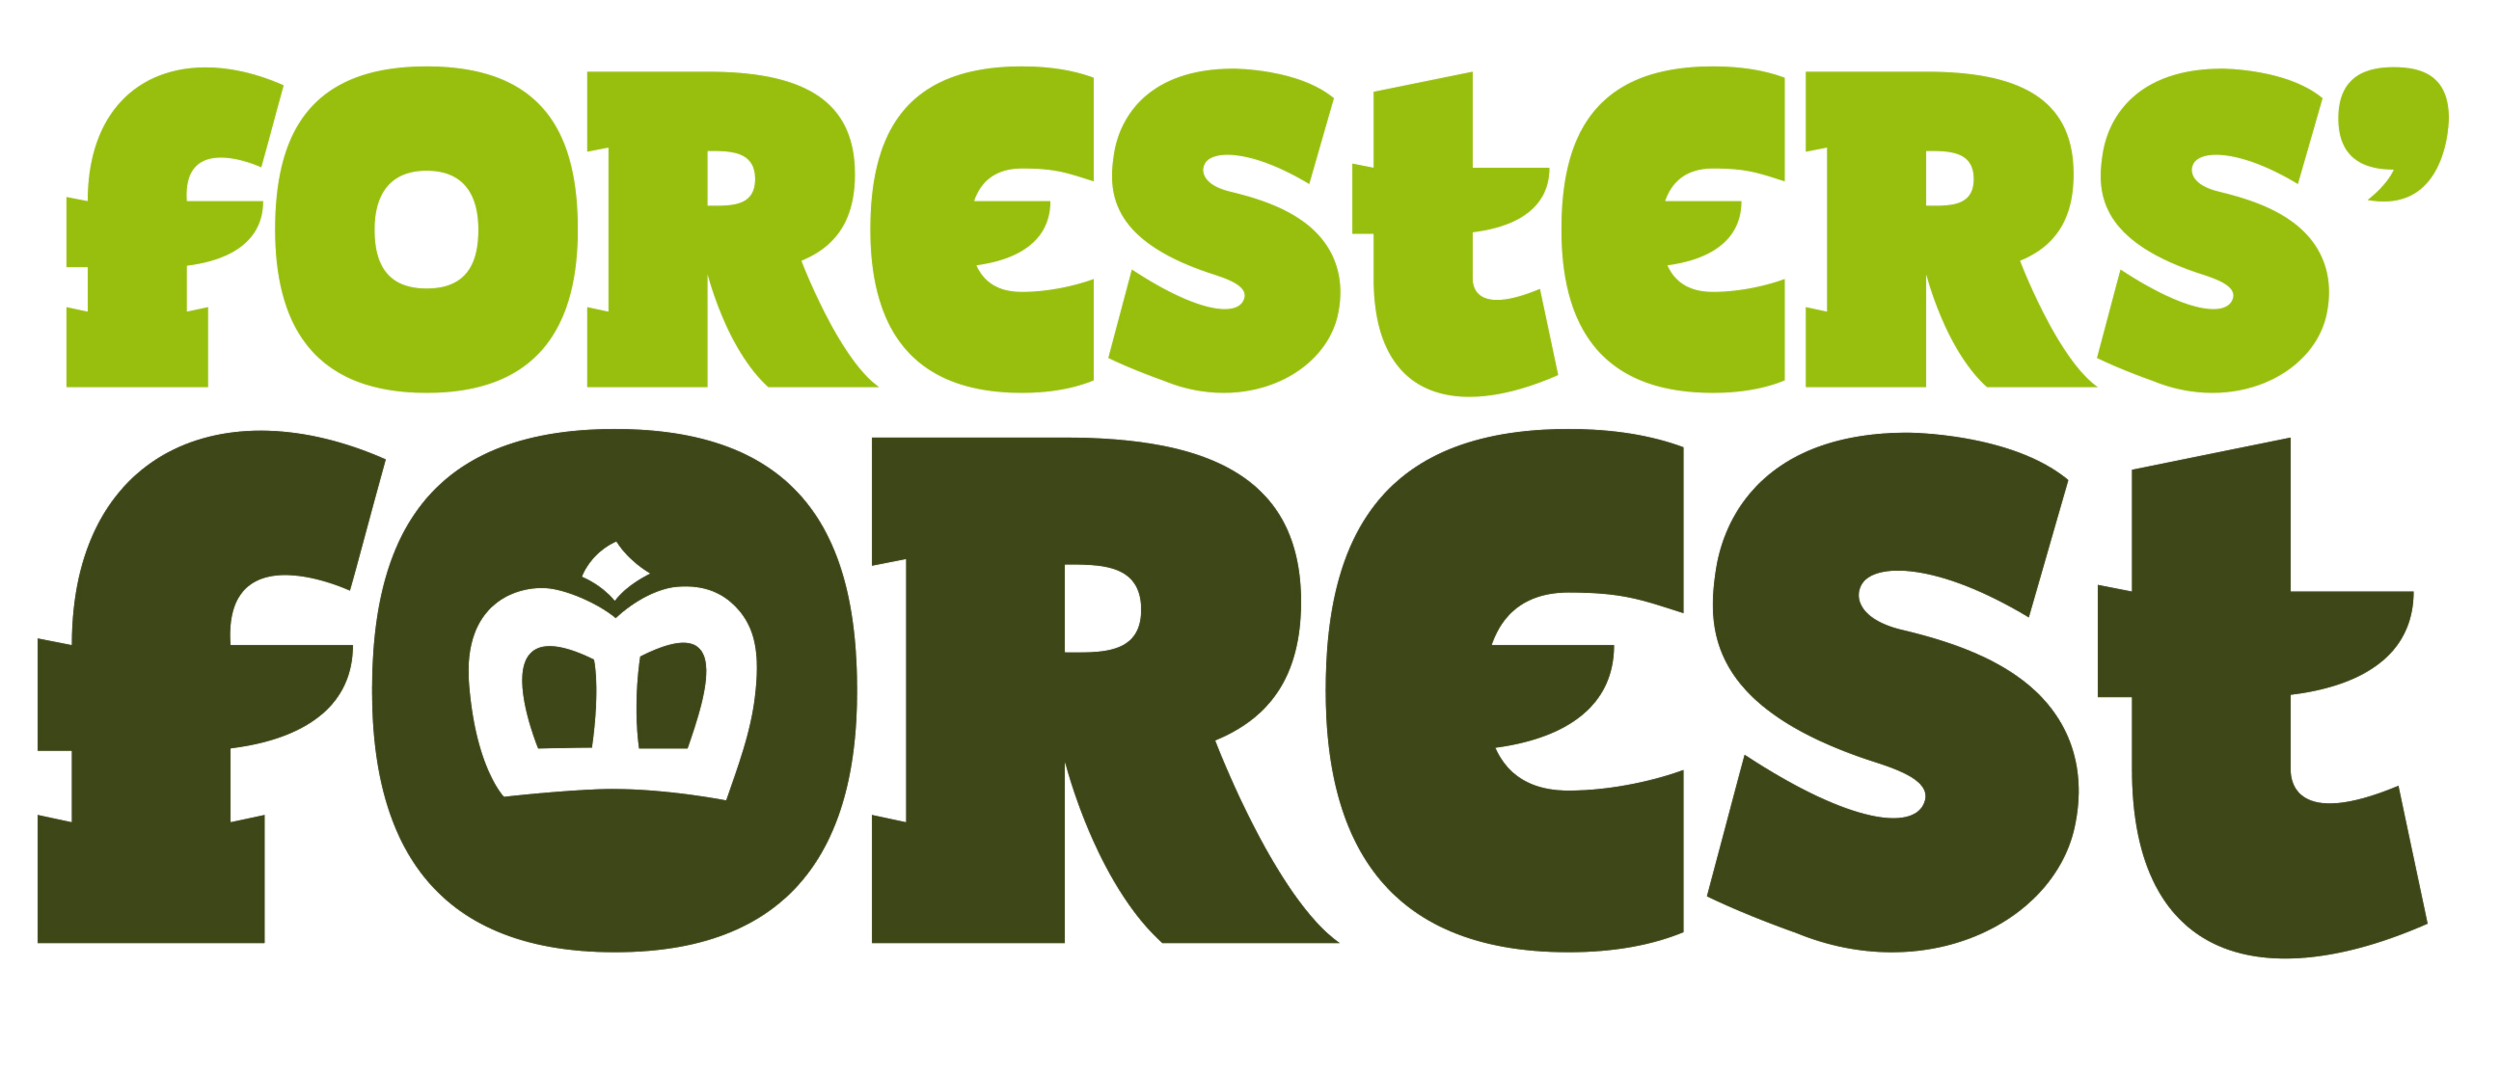 Foresters' Forest logo